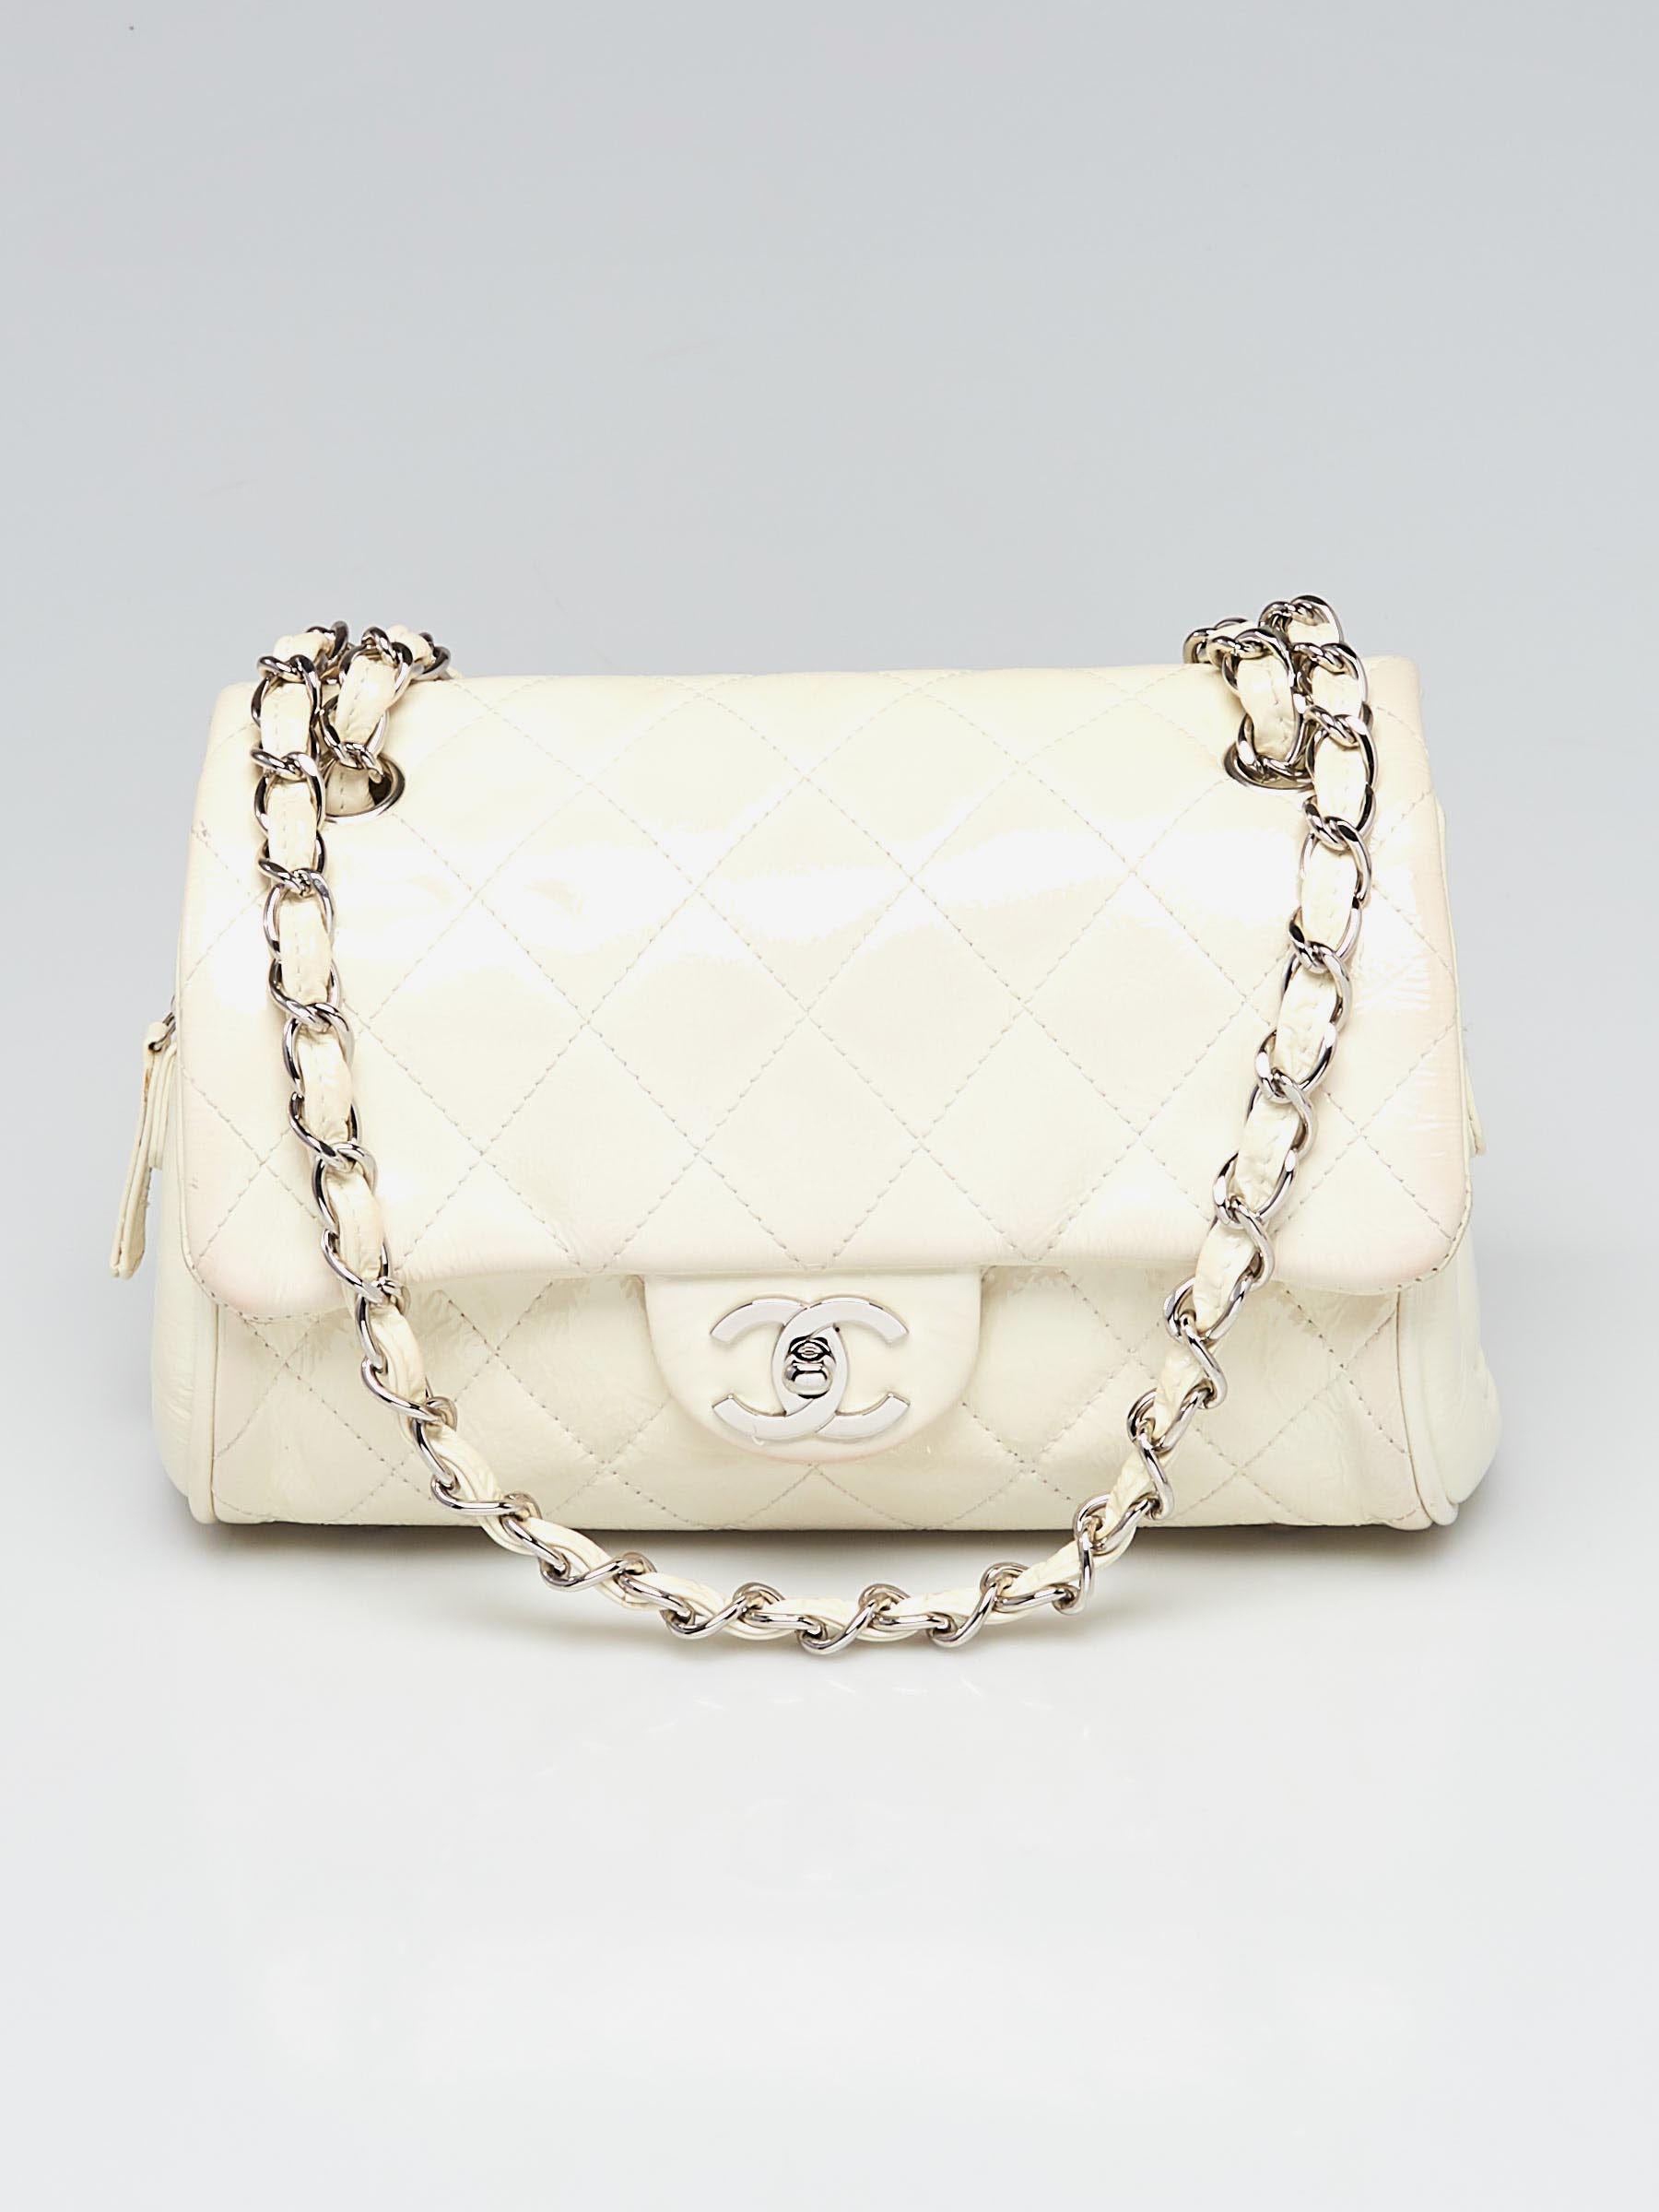 Chanel White Quilted Caviar Leather Grand Shopping Tote Bag